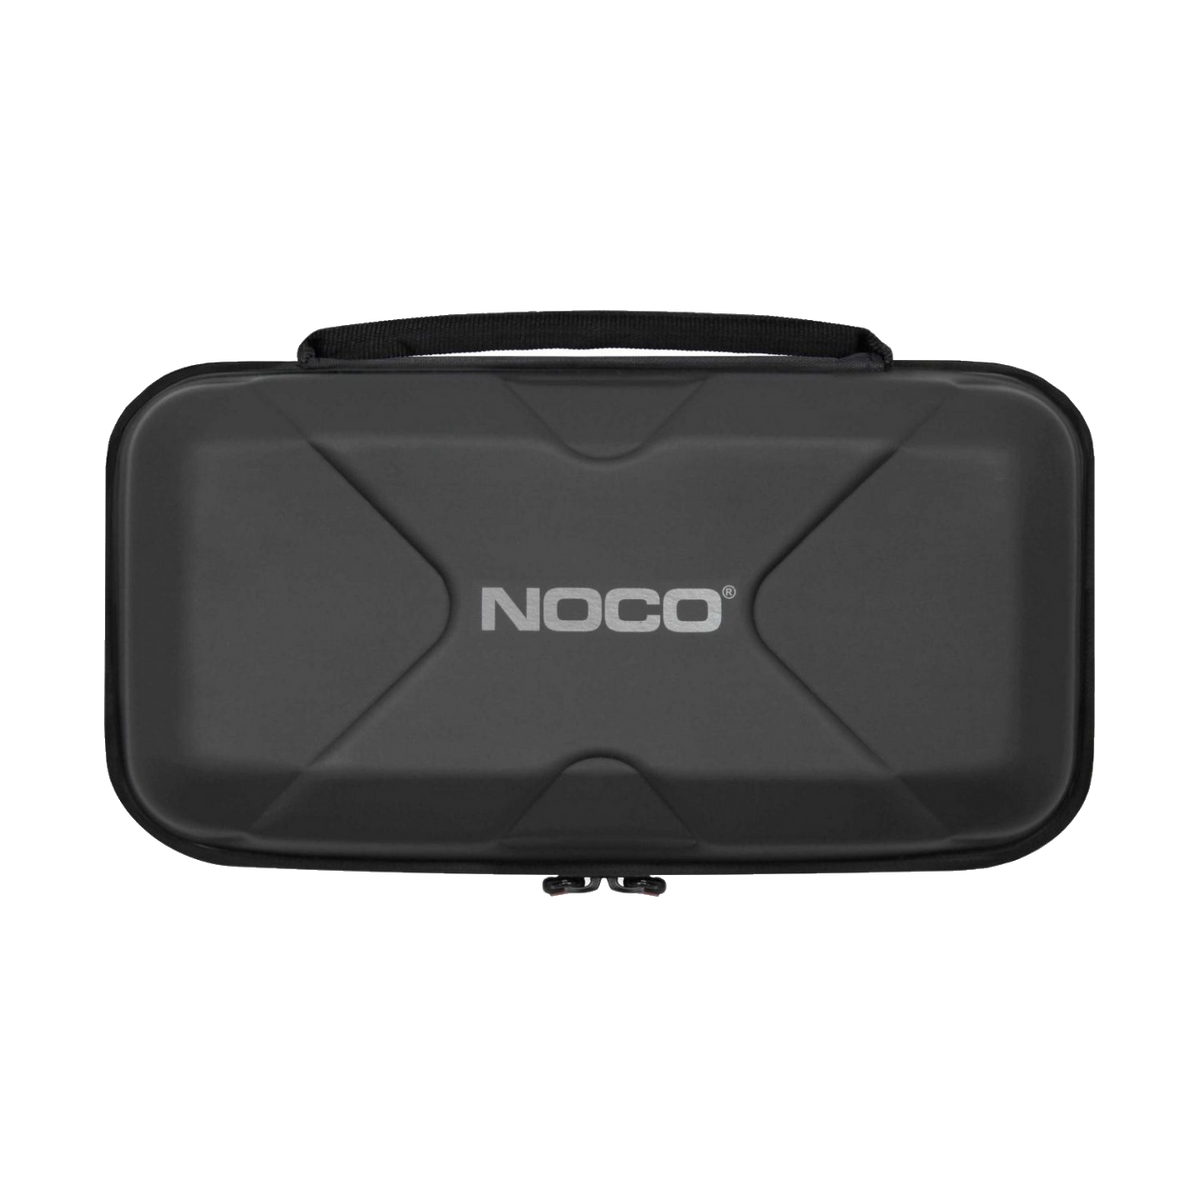 Noco Protection Case for GB40